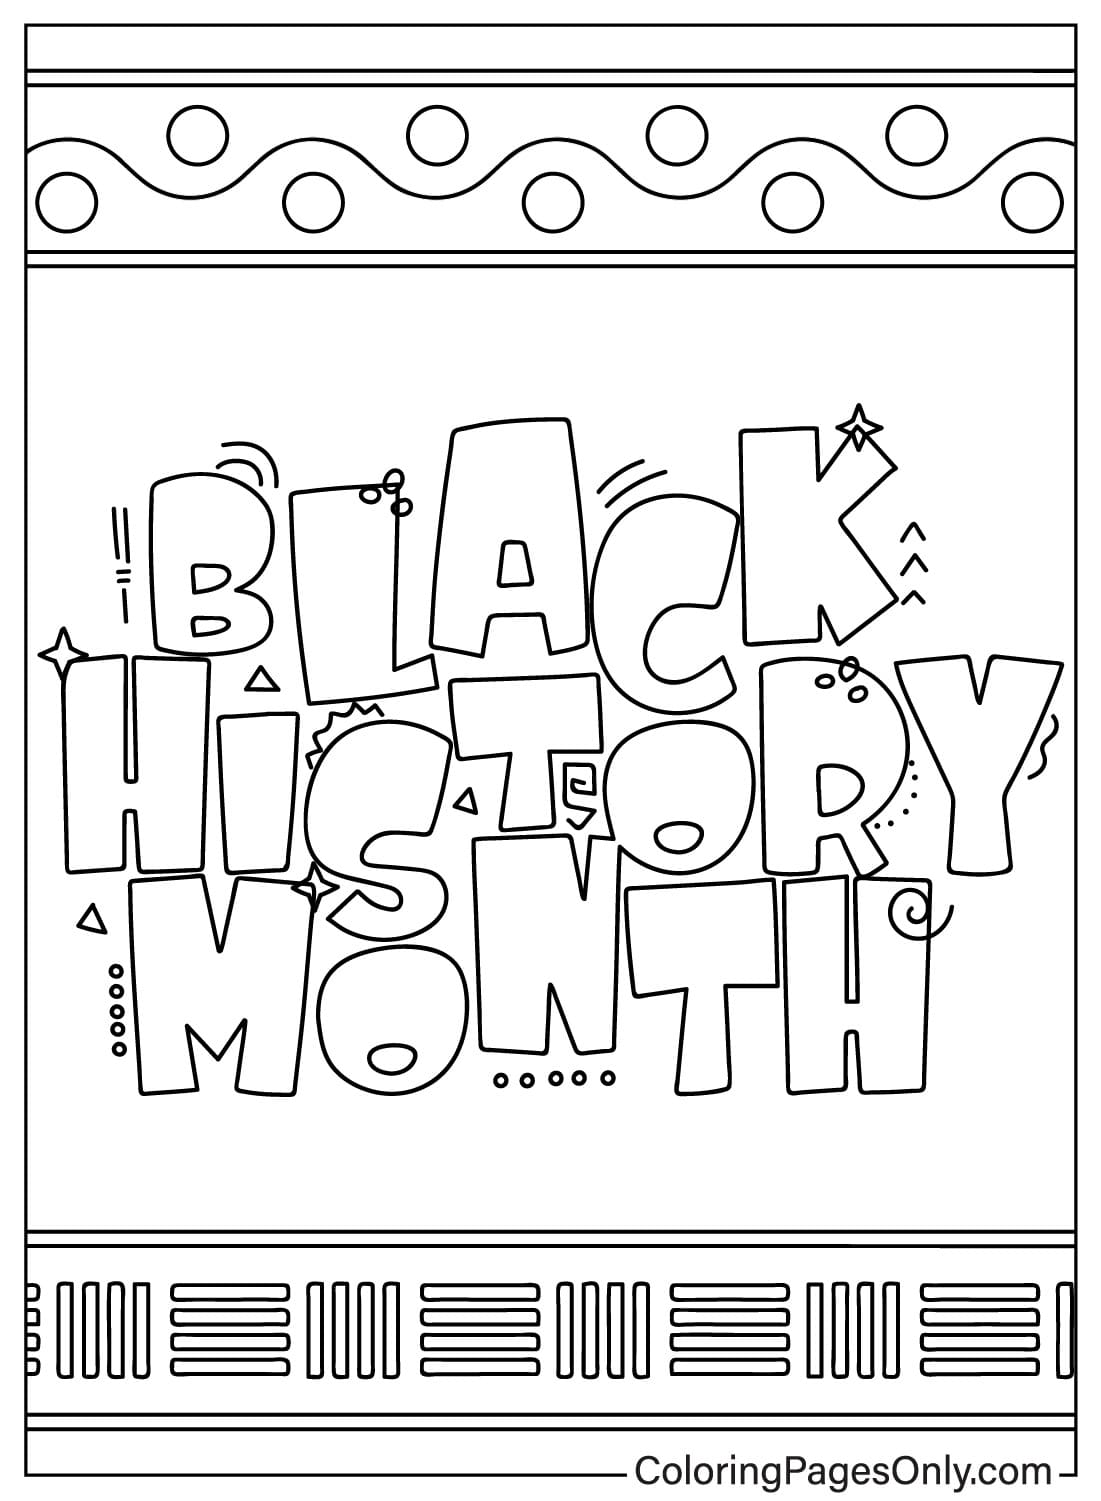 44 February 2024 Coloring Pages - ColoringPagesOnly.com